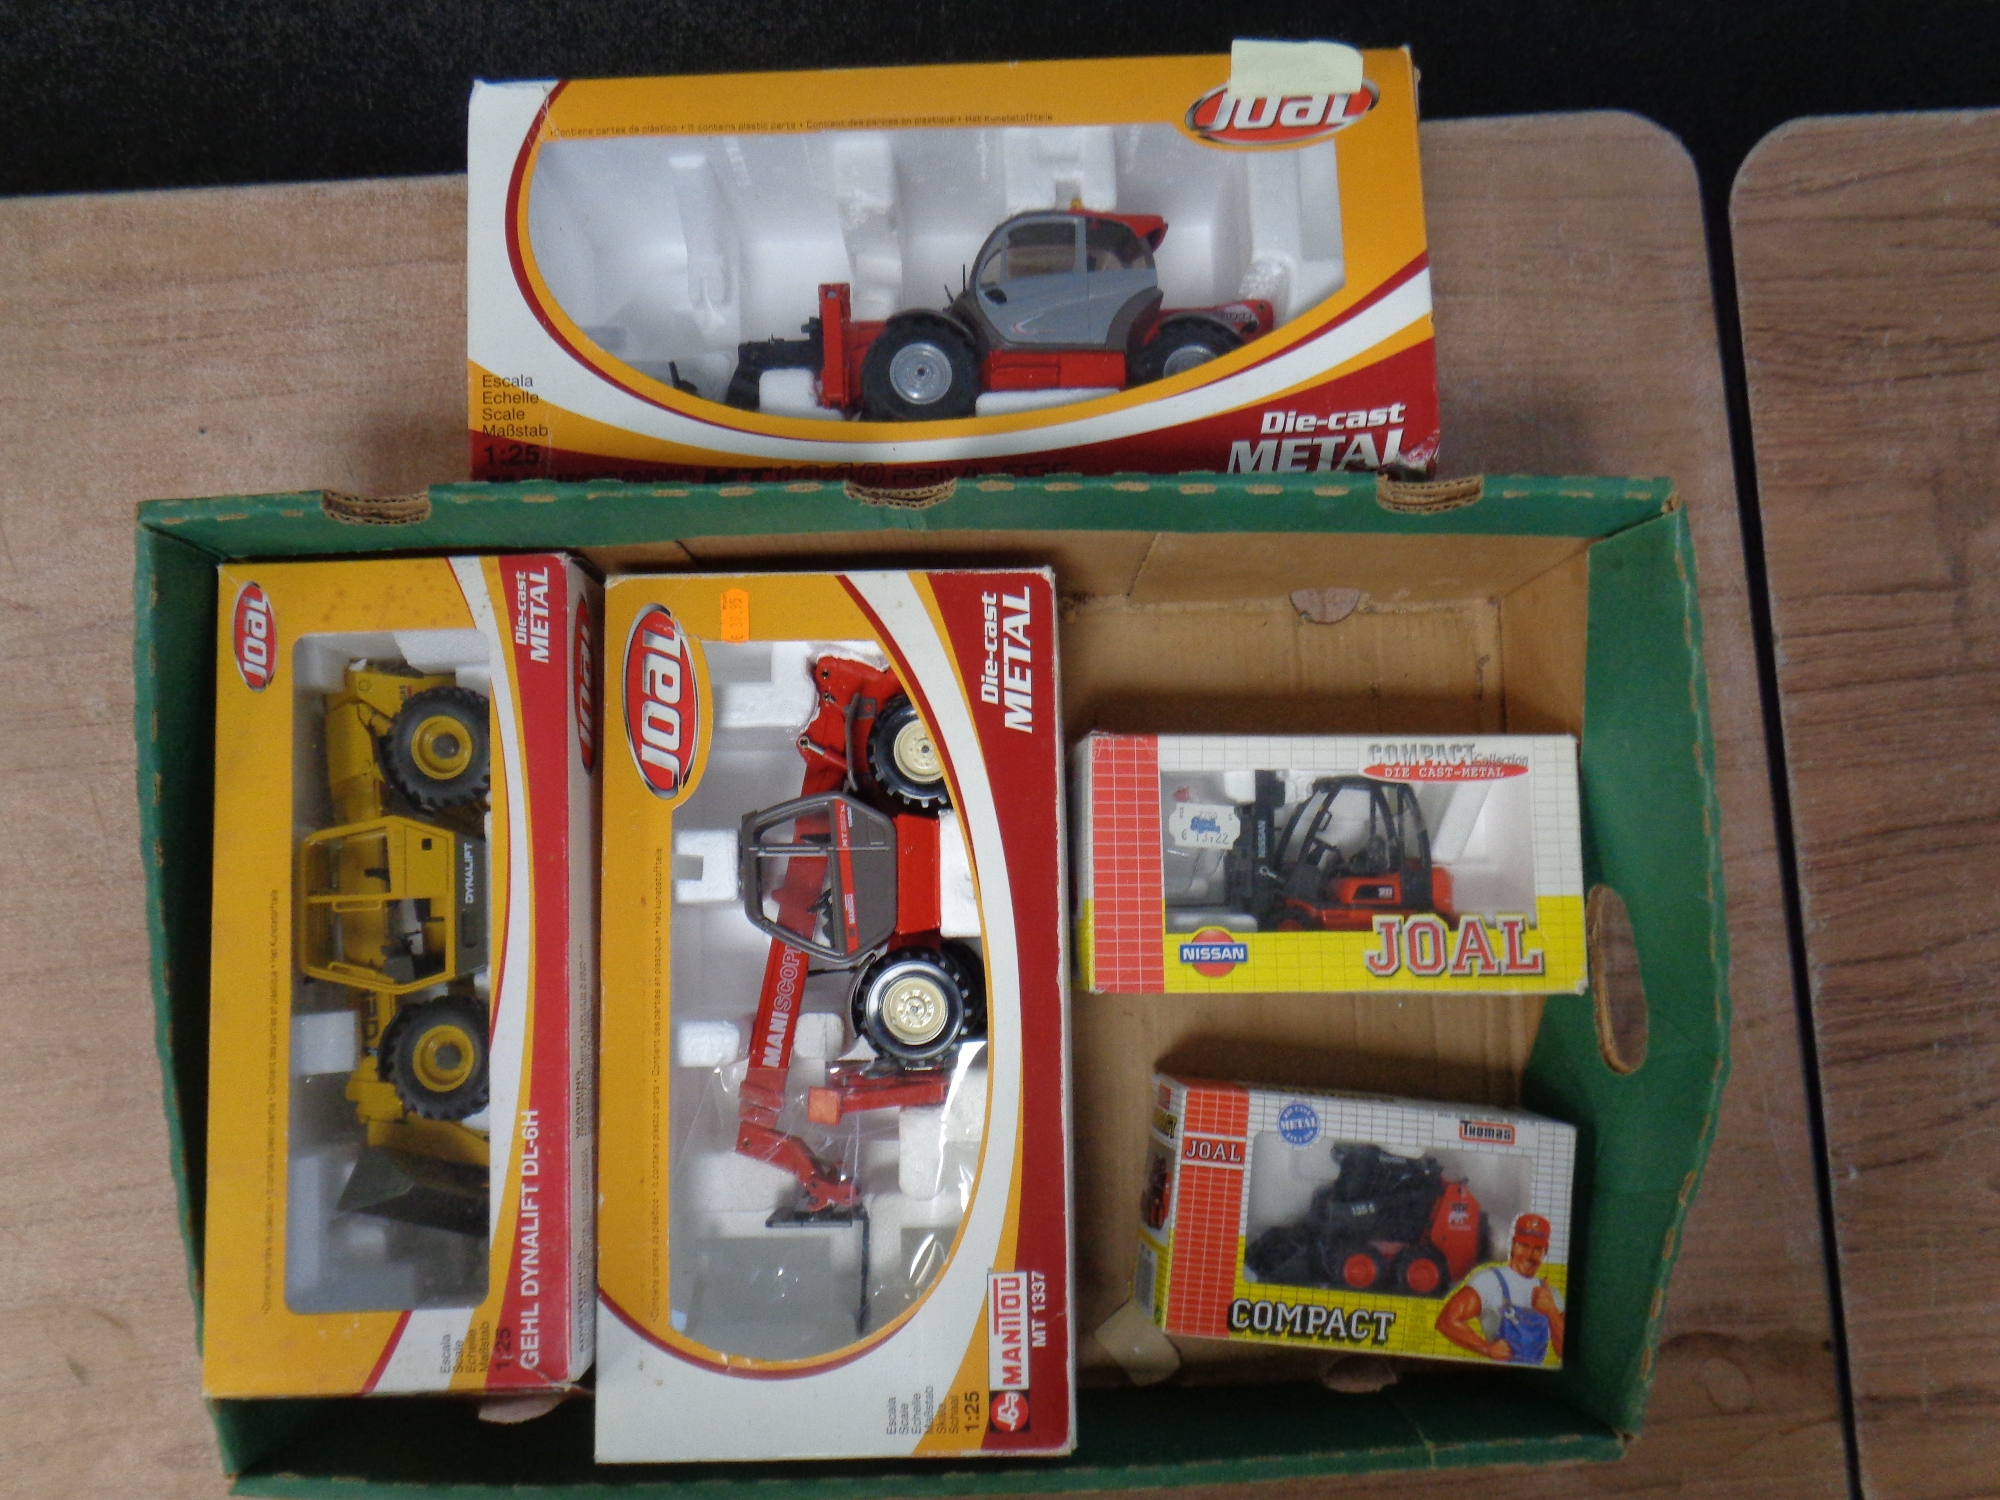 A box containing five Joal die cast construction vehicles (boxed).